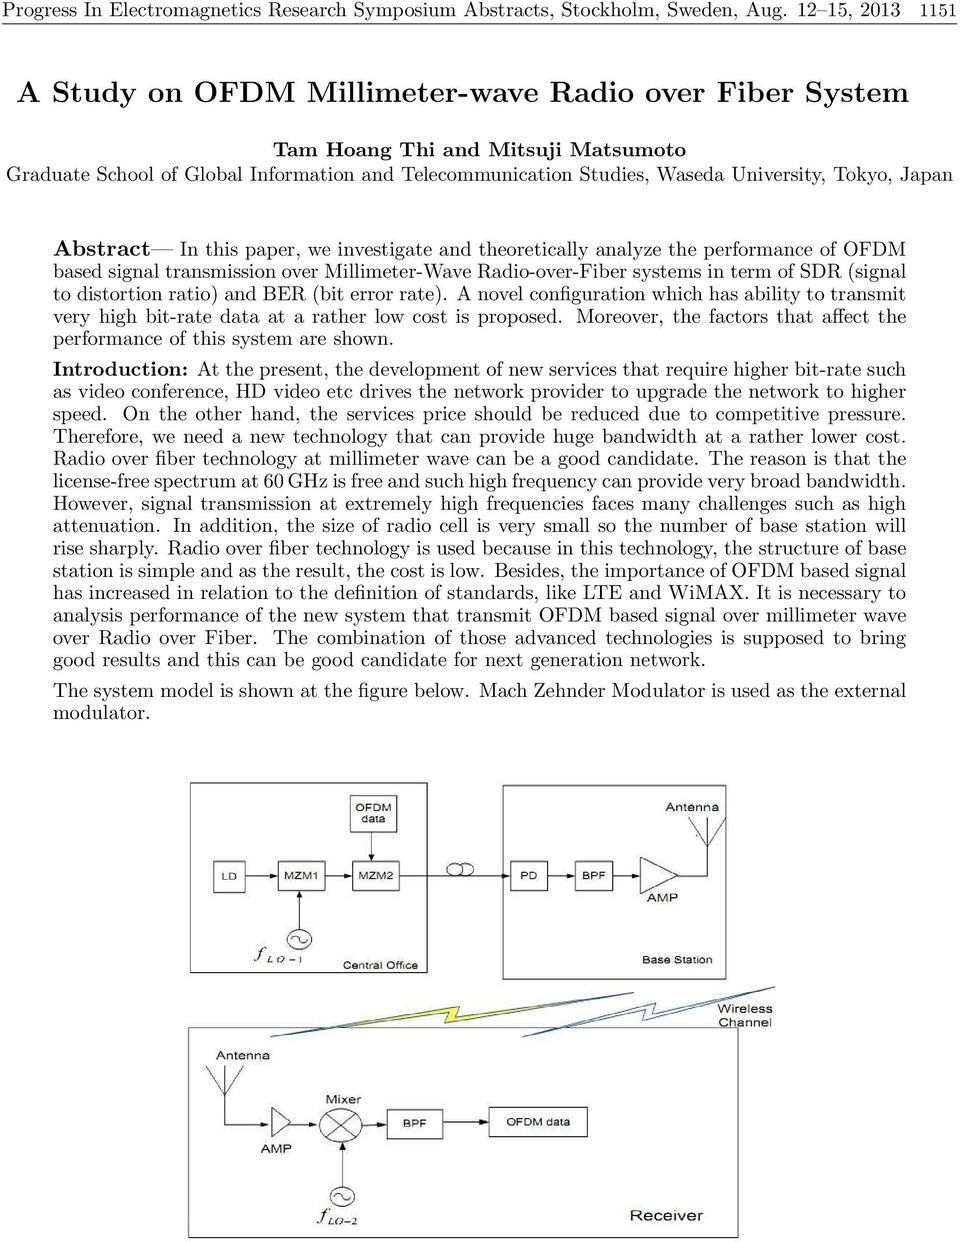 Tokyo, Japan Abstract In this paper, we investigate and theoretically analyze the performance of OFDM based signal transmission over Millimeter-Wave Radio-over-Fiber systems in term of SDR (signal to